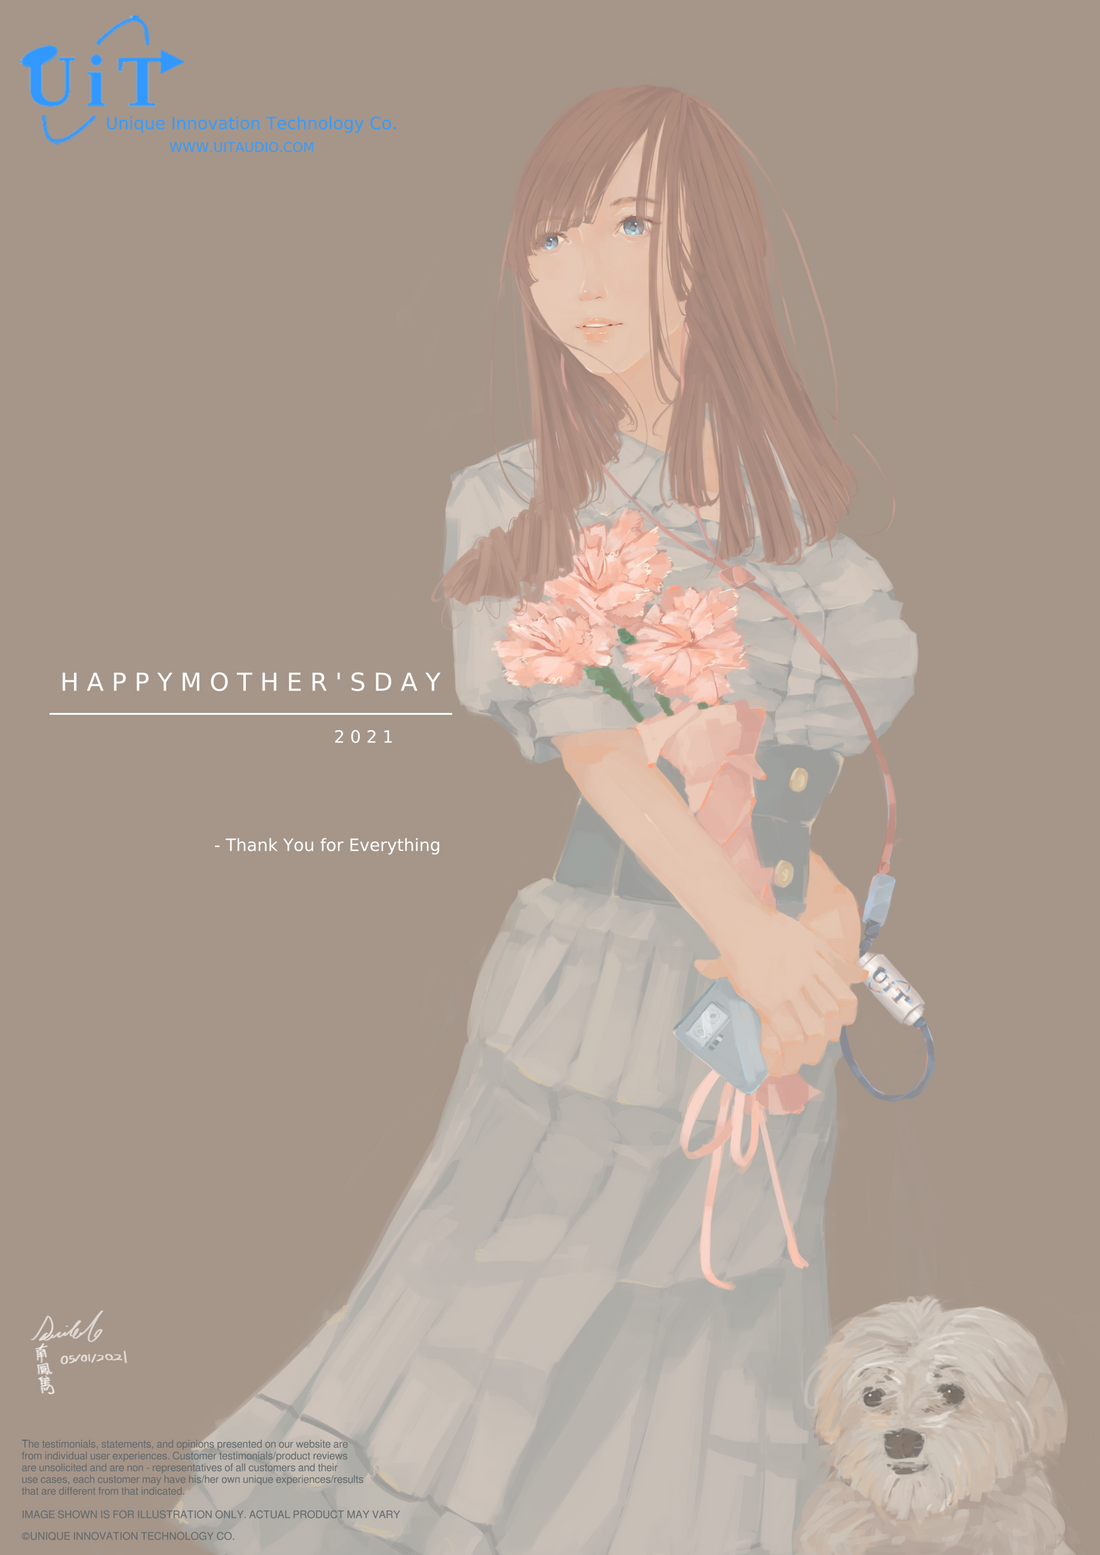 Happy Mother's Day on May 09, 2021